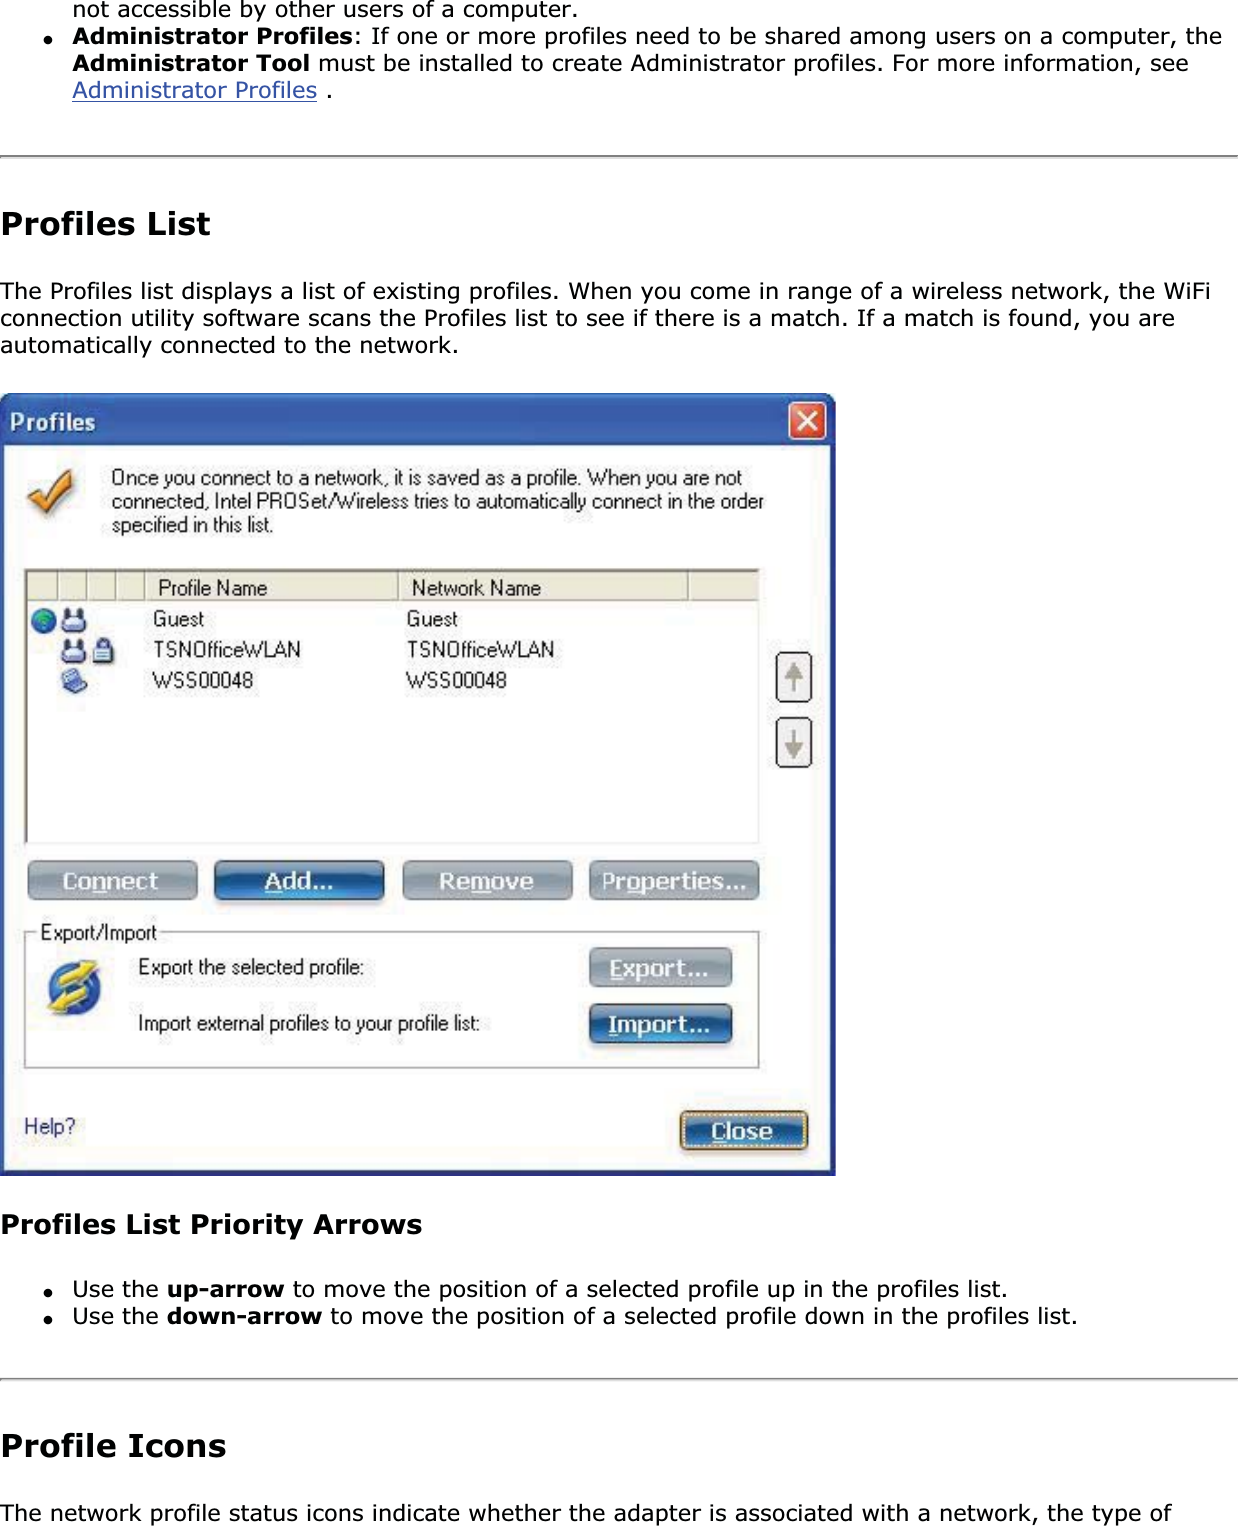 not accessible by other users of a computer. ●Administrator Profiles: If one or more profiles need to be shared among users on a computer, the Administrator Tool must be installed to create Administrator profiles. For more information, see Administrator Profiles . Profiles ListThe Profiles list displays a list of existing profiles. When you come in range of a wireless network, the WiFi connection utility software scans the Profiles list to see if there is a match. If a match is found, you are automatically connected to the network. Profiles List Priority Arrows●Use the up-arrow to move the position of a selected profile up in the profiles list.●Use the down-arrow to move the position of a selected profile down in the profiles list.Profile IconsThe network profile status icons indicate whether the adapter is associated with a network, the type of 